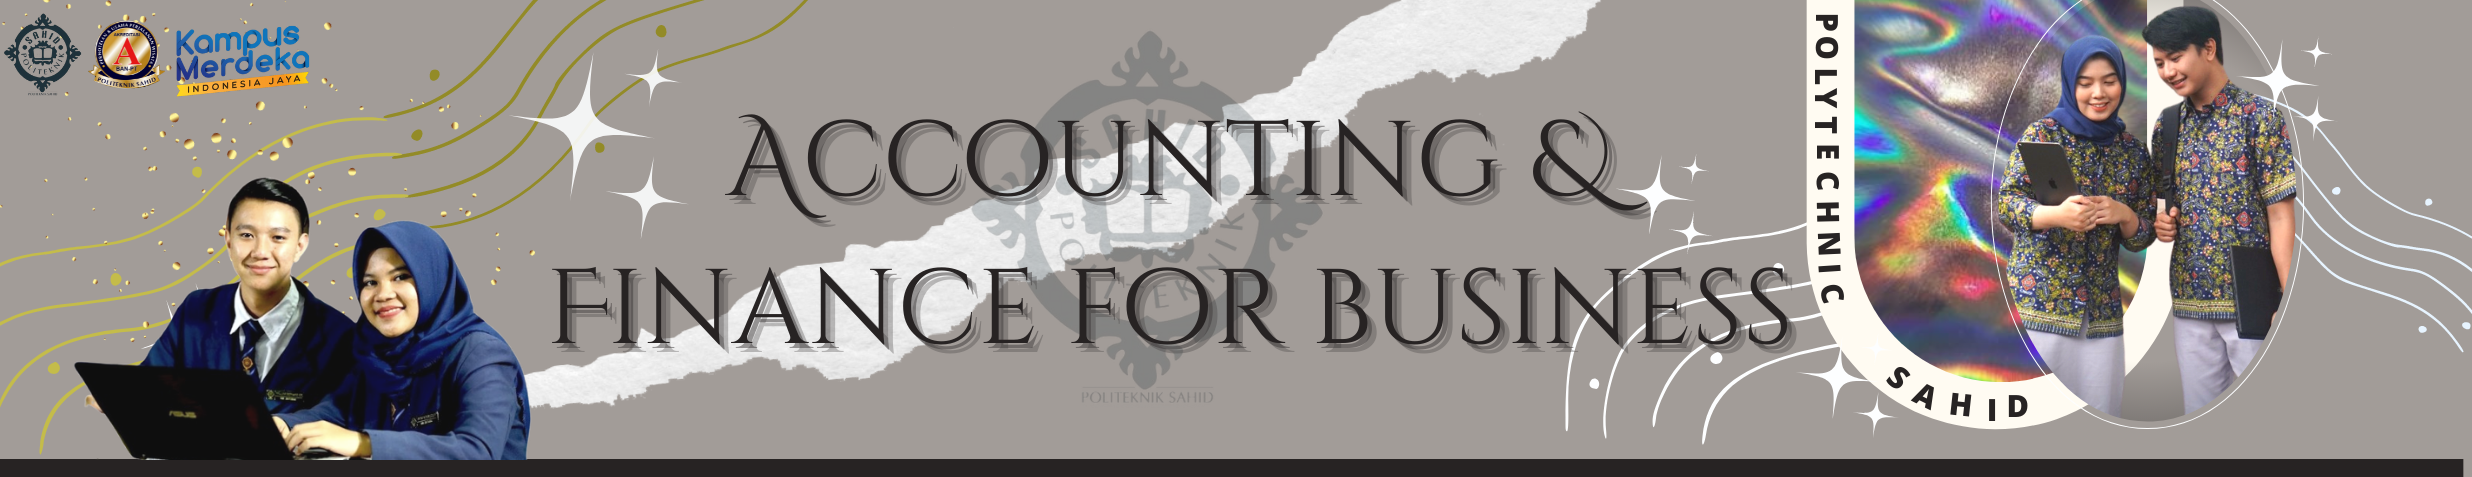 Accounting & Finance for Business